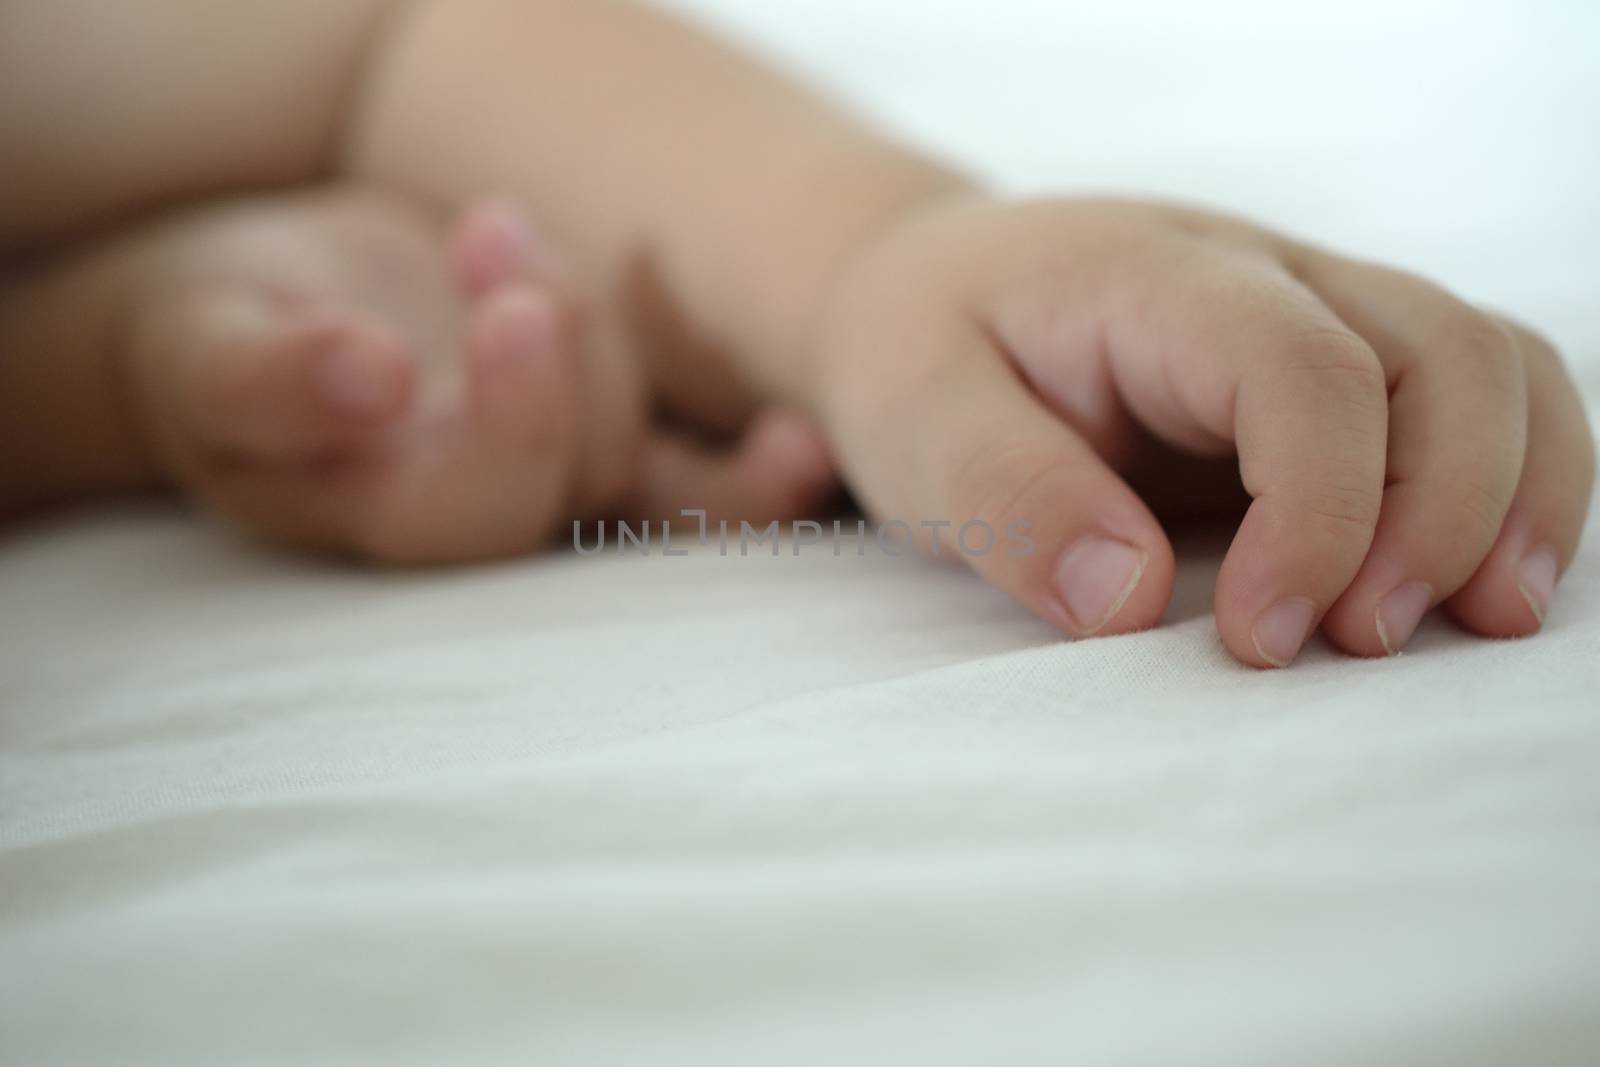 hands of a sleeping baby, white besheet and backround